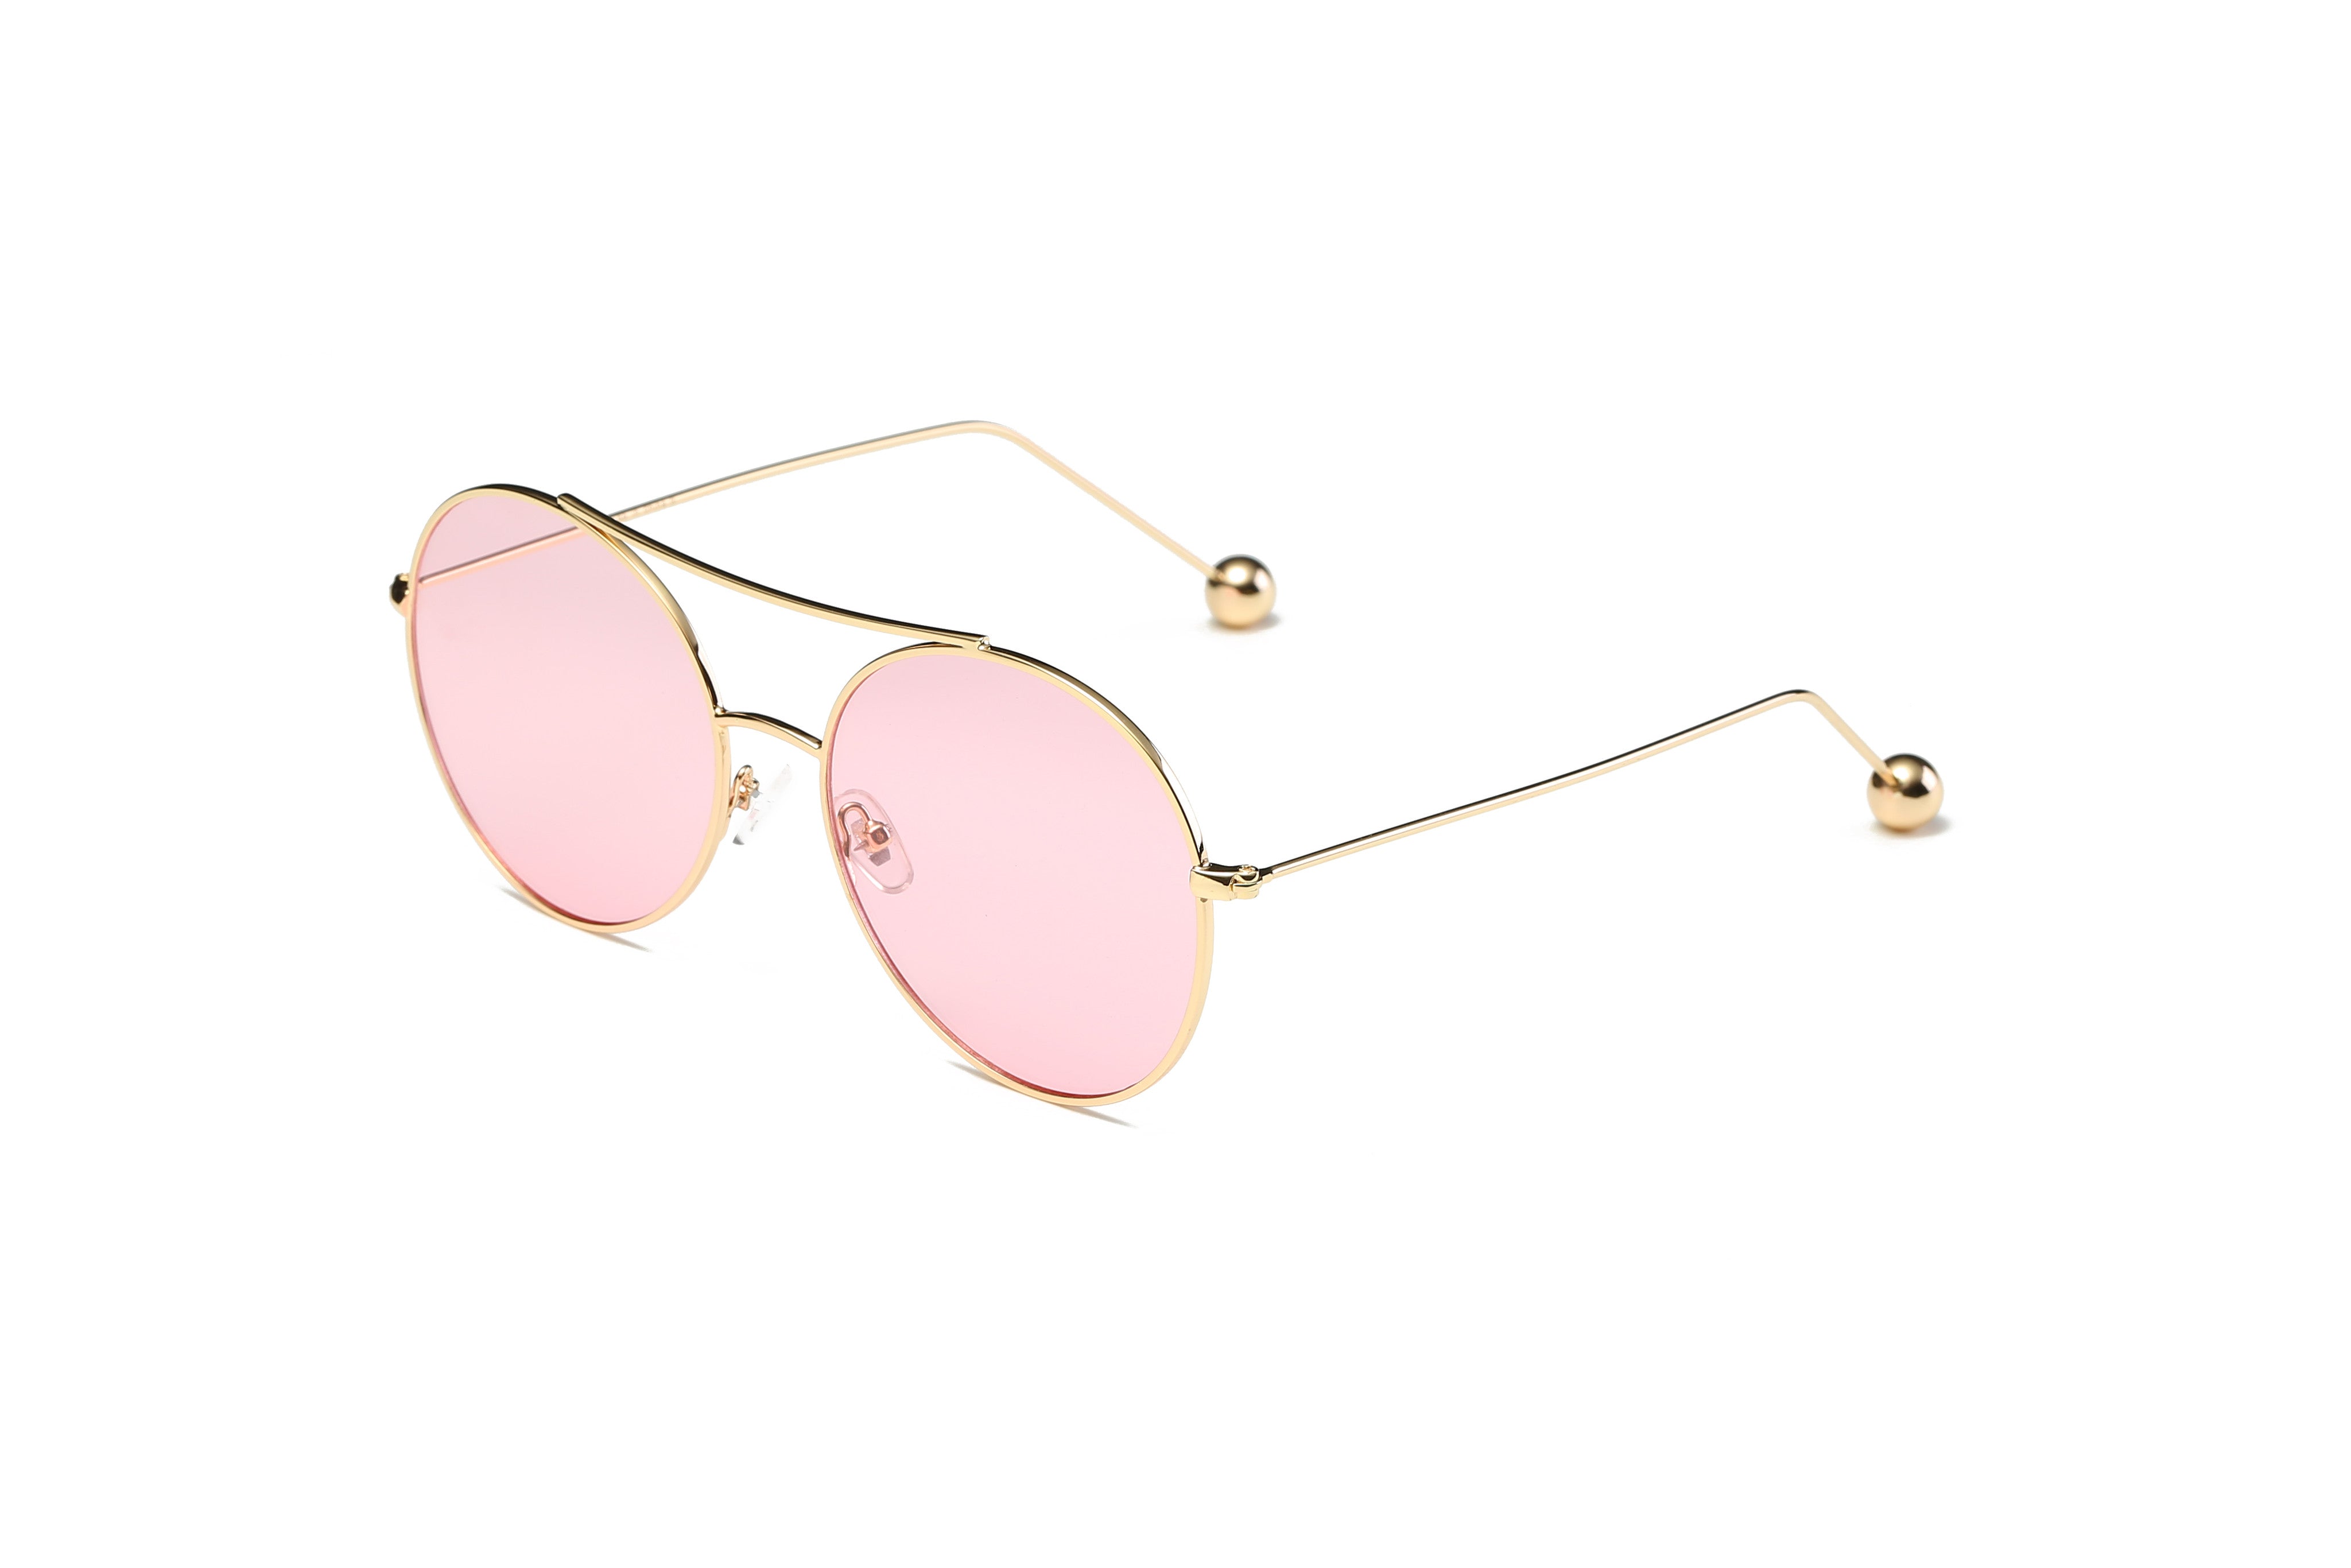 S1016 - Unisex Round Tinted Lens Sunglasses Pink lens with gold FRAME